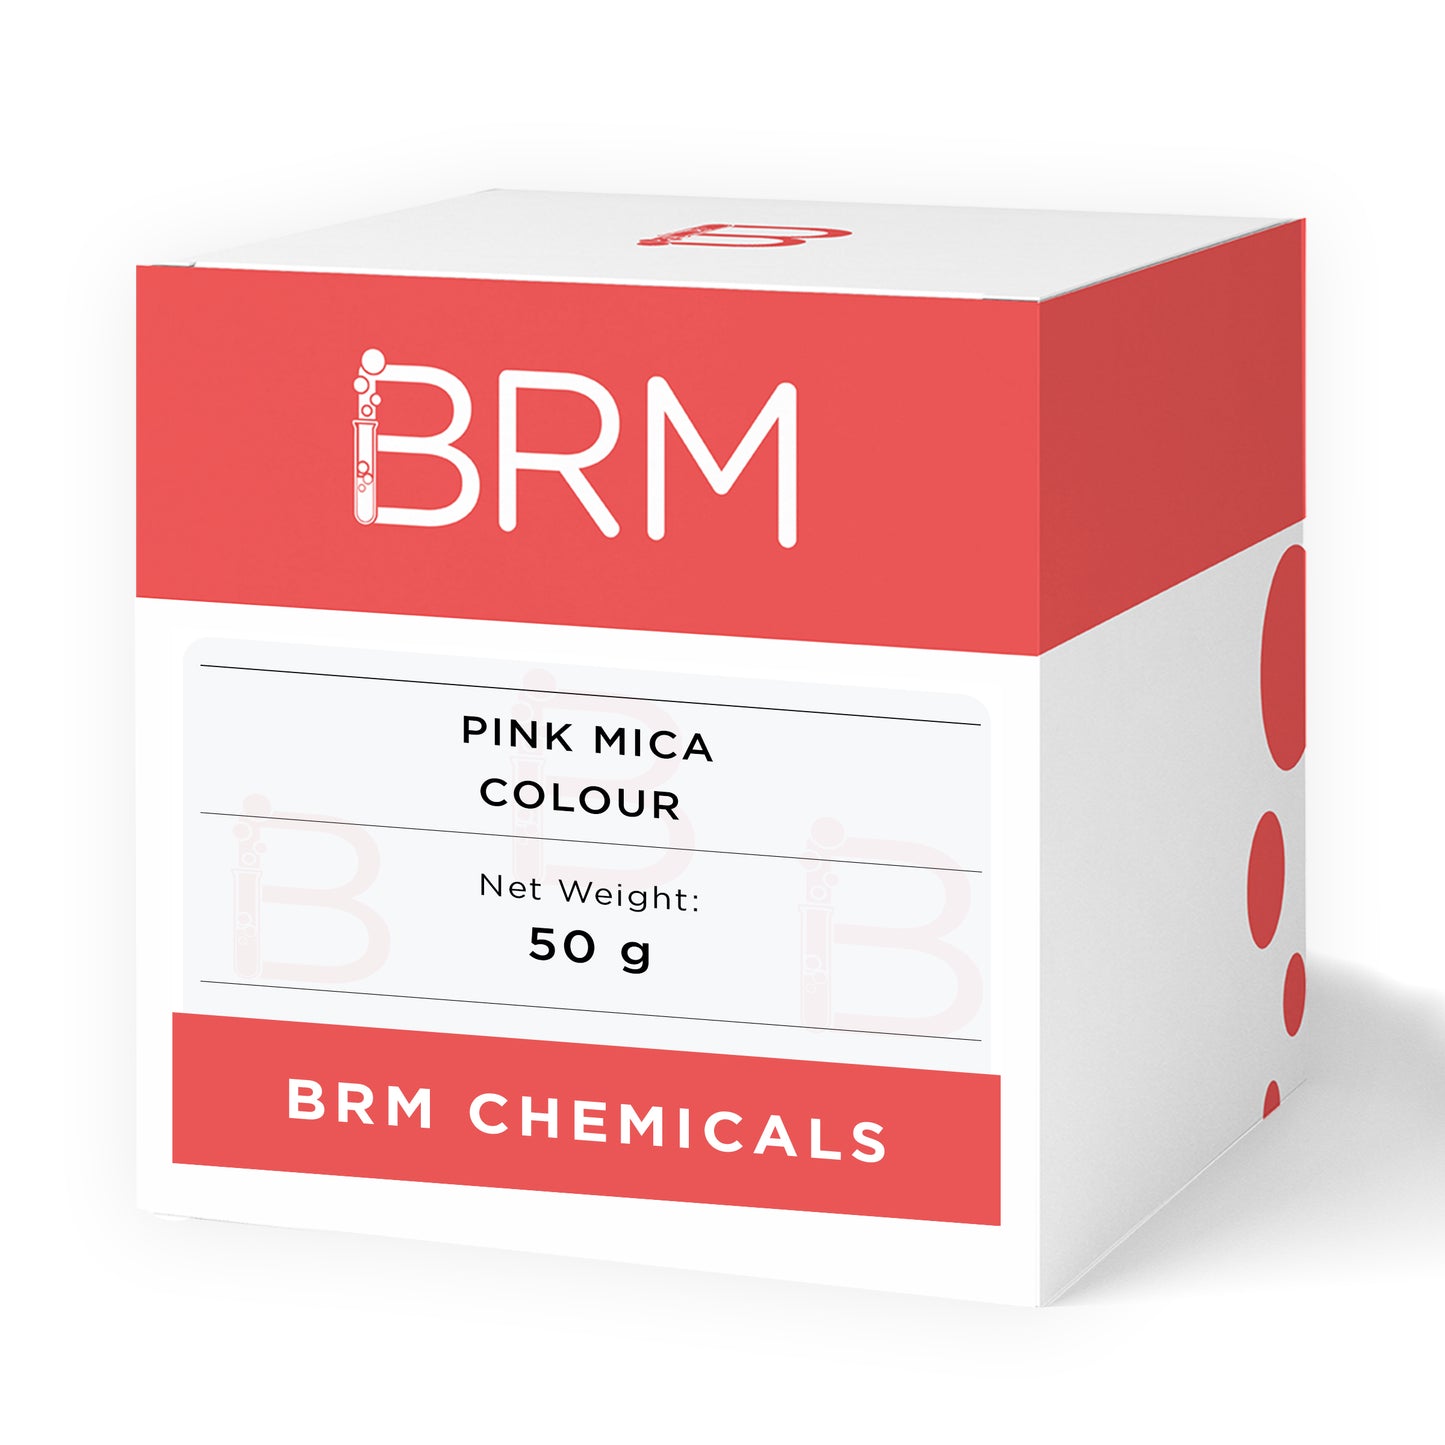 Pink Mica Colour